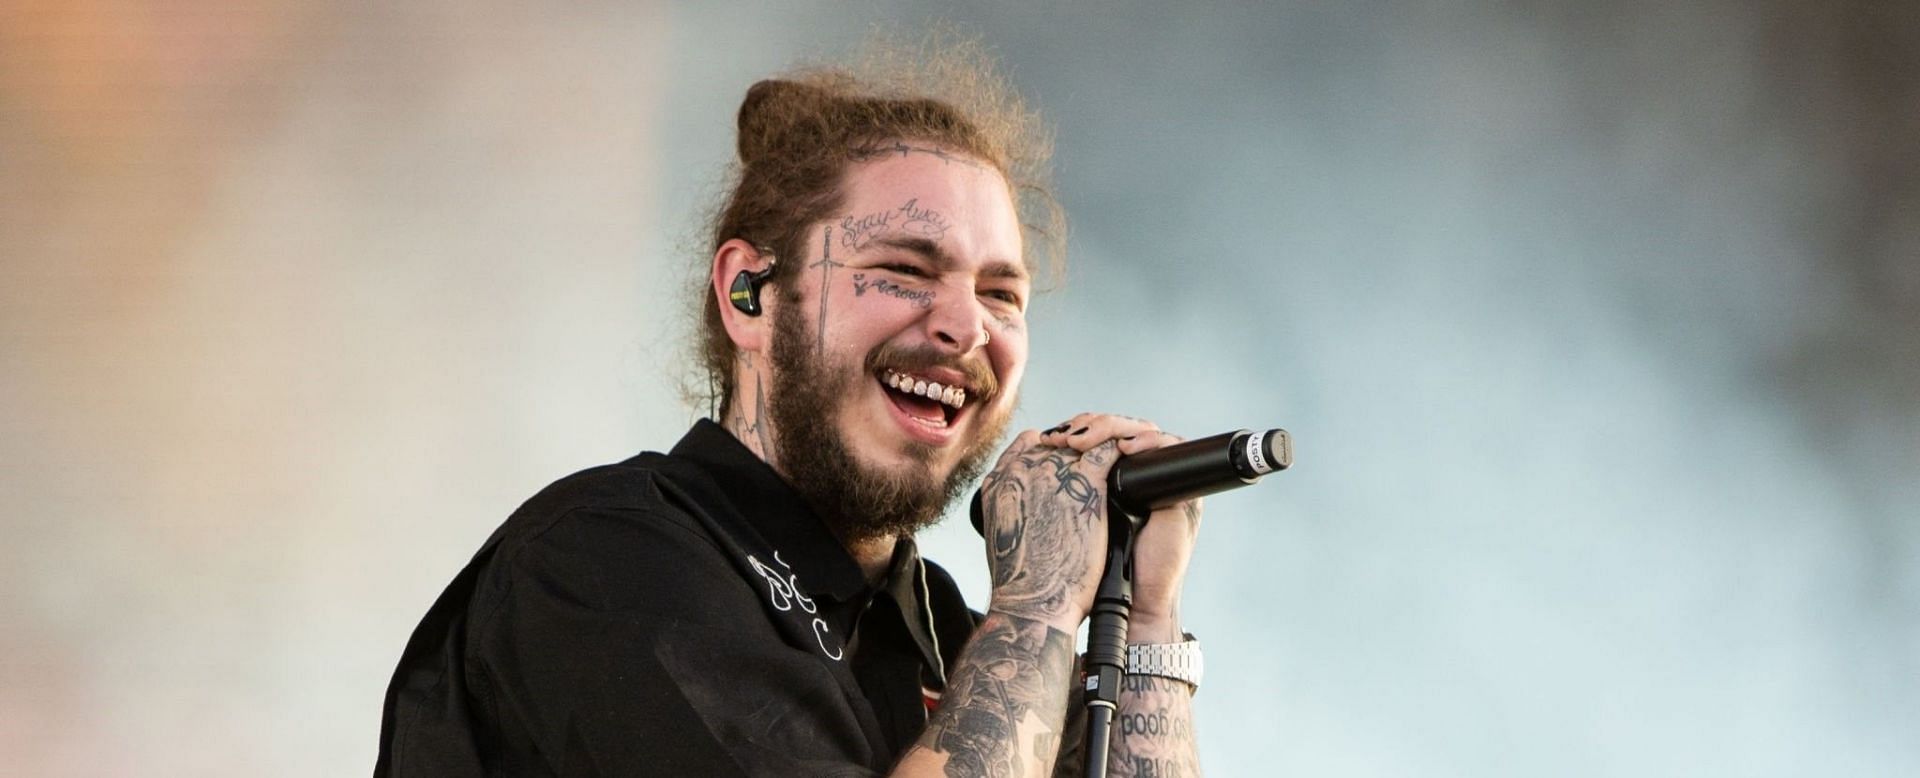 Post Malone was raised by his father, Richard Post and his stepmother Jodie (Image via Lorne Thomson/Getty Images)